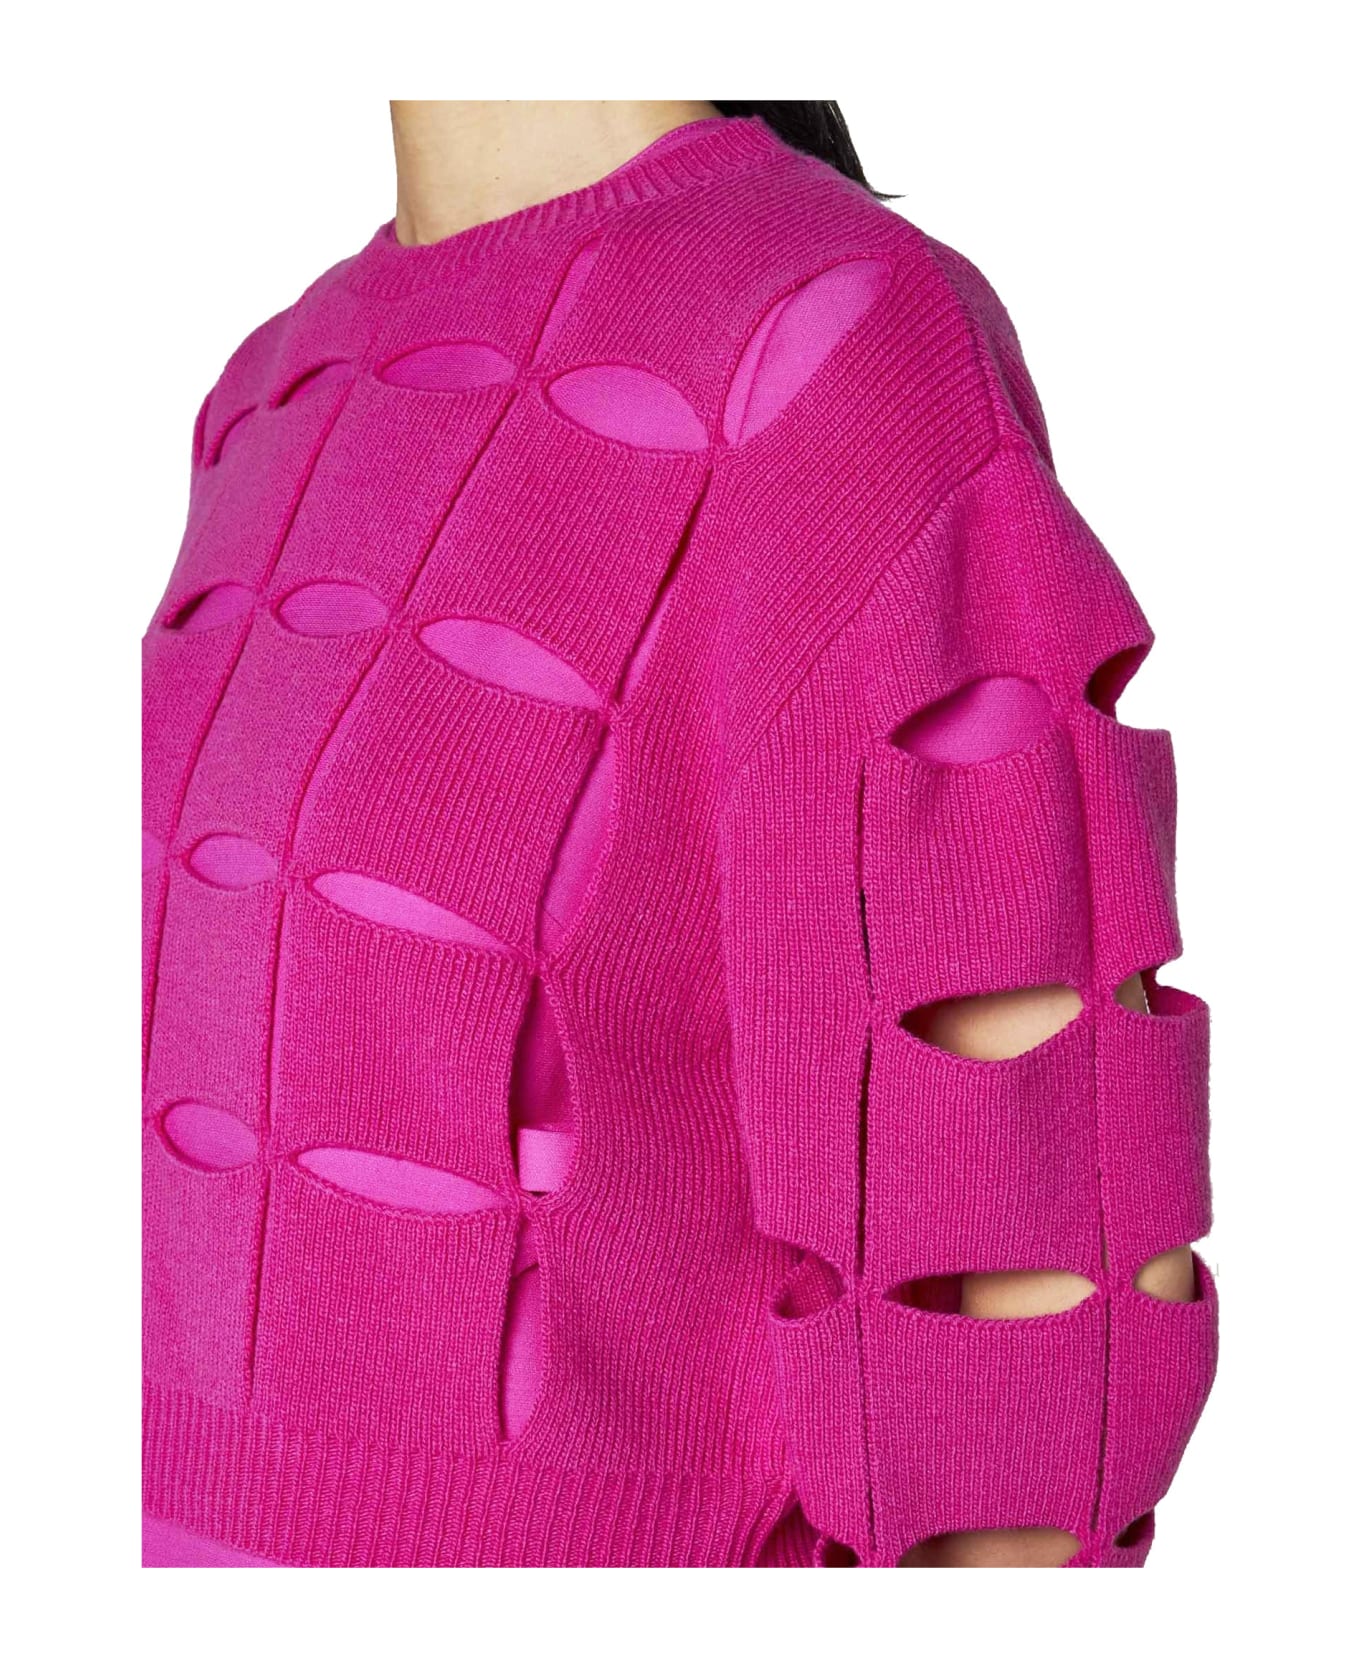 Valentino Cut-out Wool Sweater - Pink ニットウェア